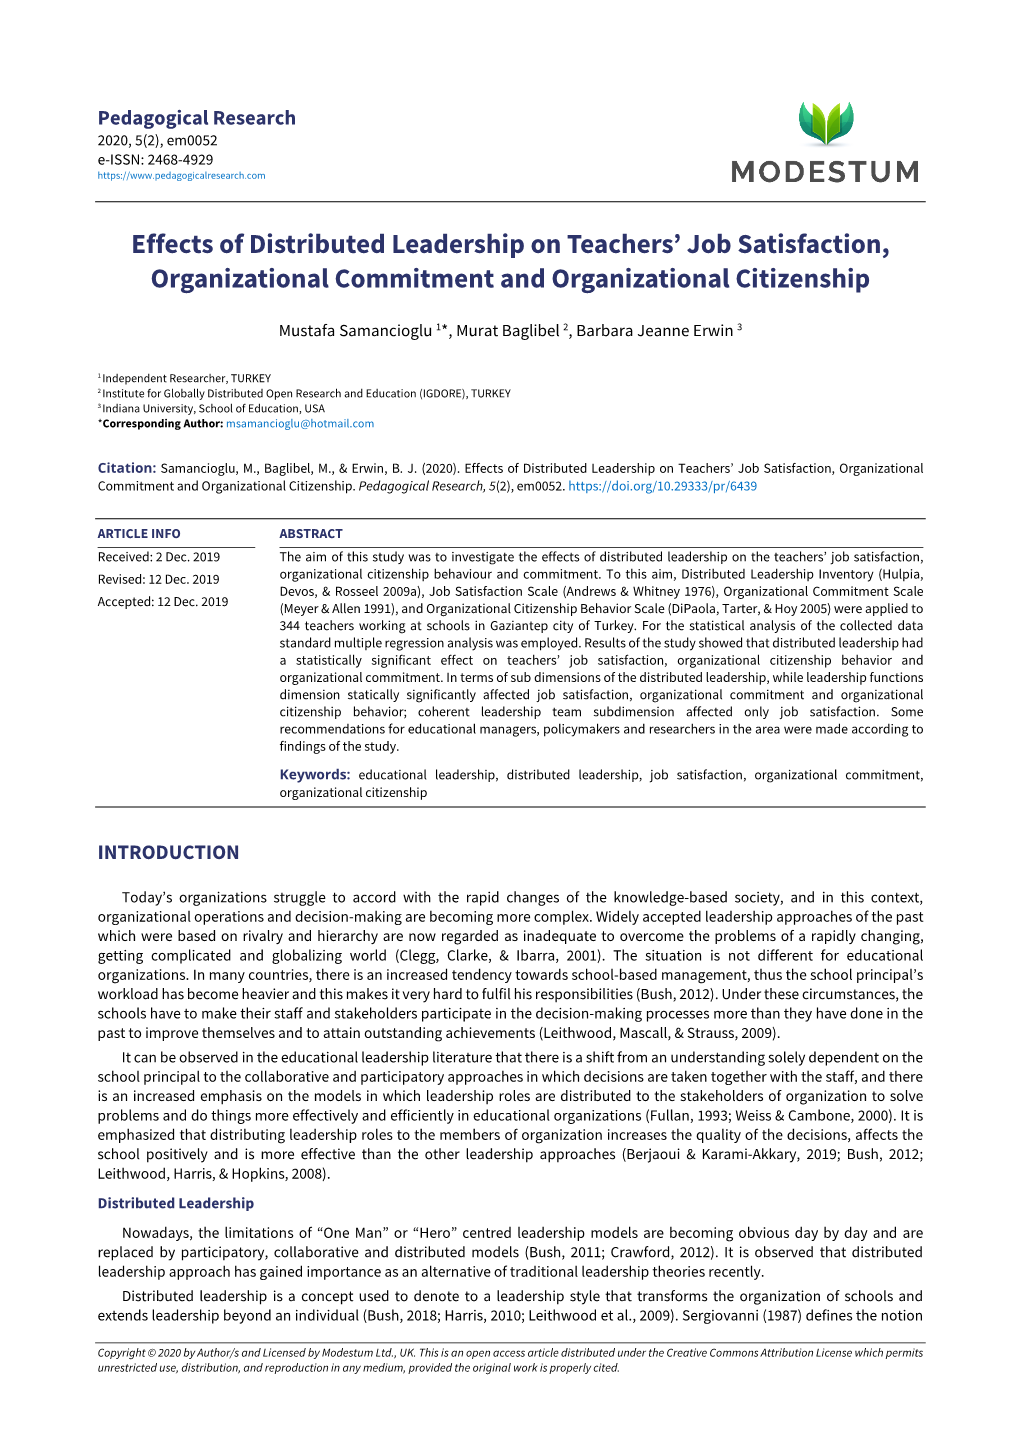 Effects of Distributed Leadership on Teachers' Job Satisfaction, Organizational Commitment and Organizational Citizenship